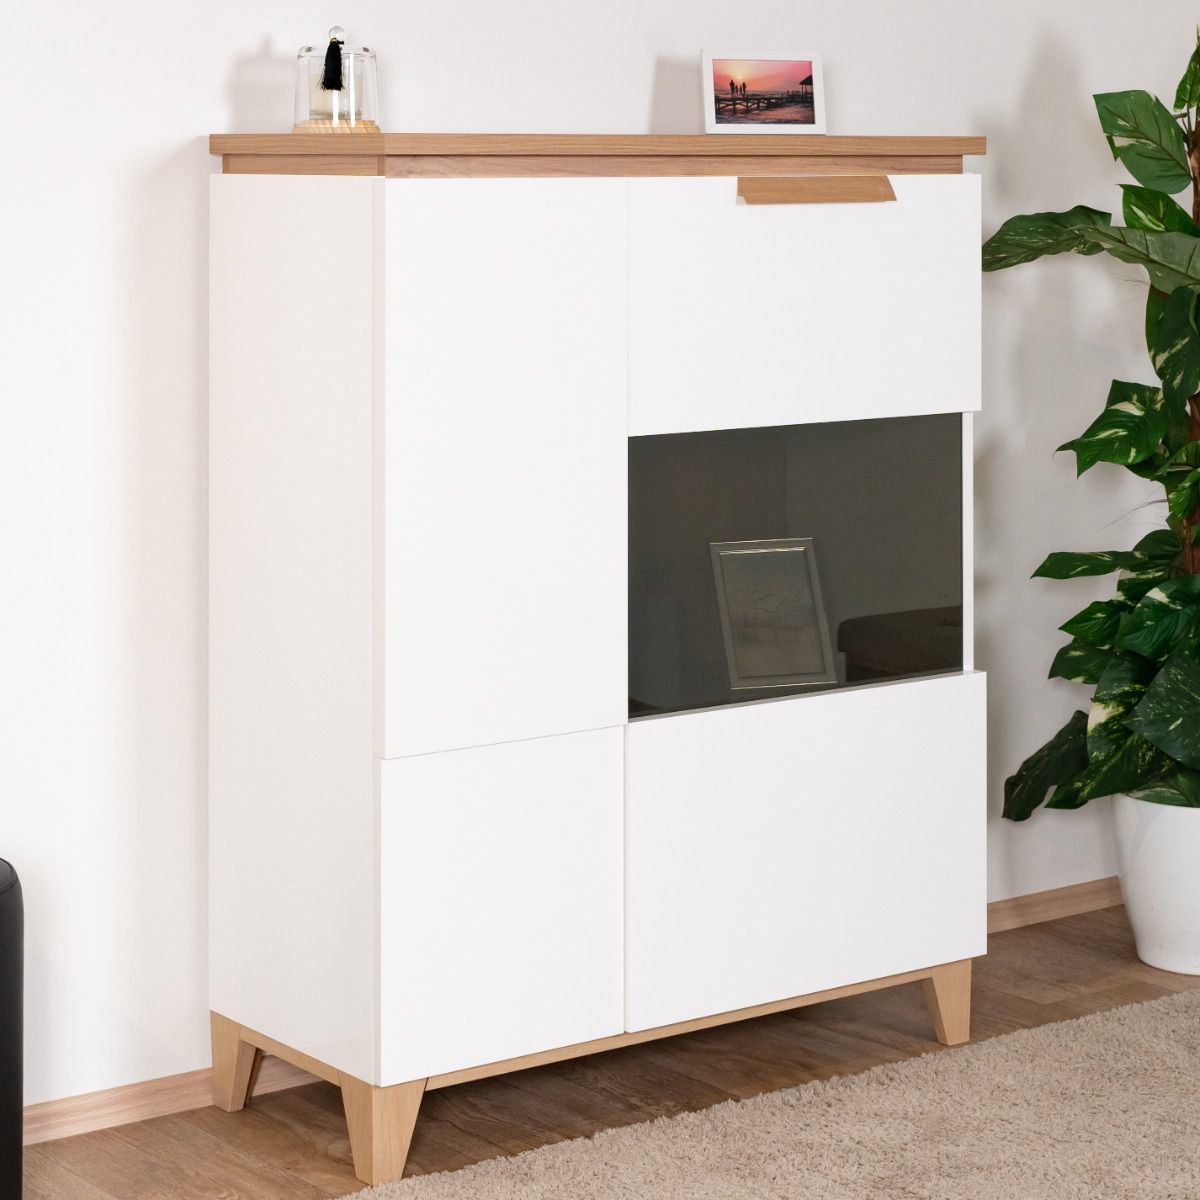 Elegant Safotu 03 display cabinet, white high gloss / walnut, 122 x 95 x 41 cm, two-tone, soft close door system, 3 spacious compartments with plenty of storage space